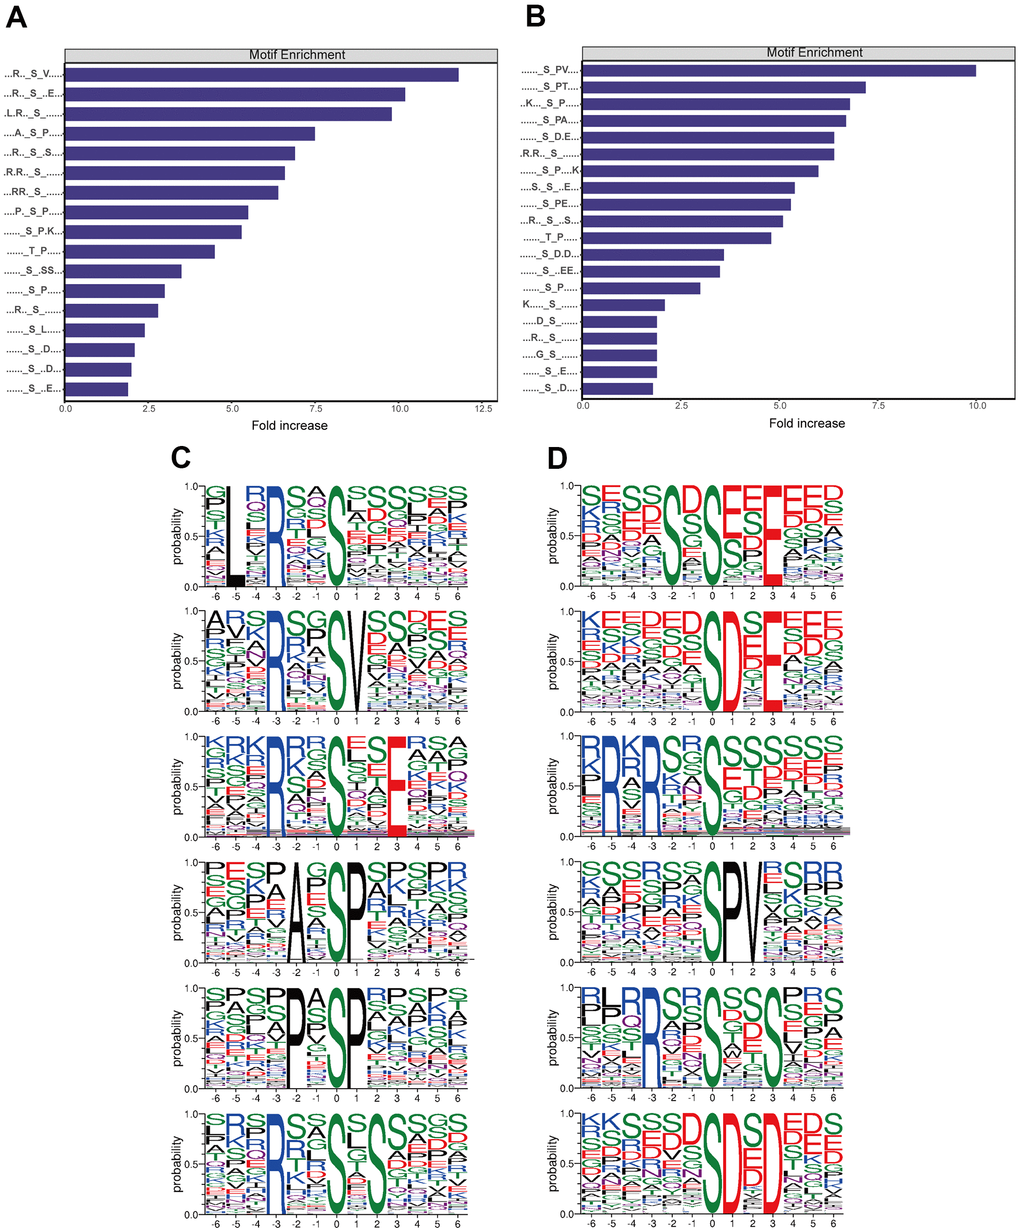 Analysis of motifs differentially phosphorylated between CRC cultures treated with triptolide or vehicle. (A) Motifs whose phosphorylation is upregulated by triptolide. (B) Motifs whose phosphorylation is downregulated by triptolide. (C) Ranking of the top six motifs upregulated by triptolide. (D) Ranking of the top six motifs downregulated by triptolide.